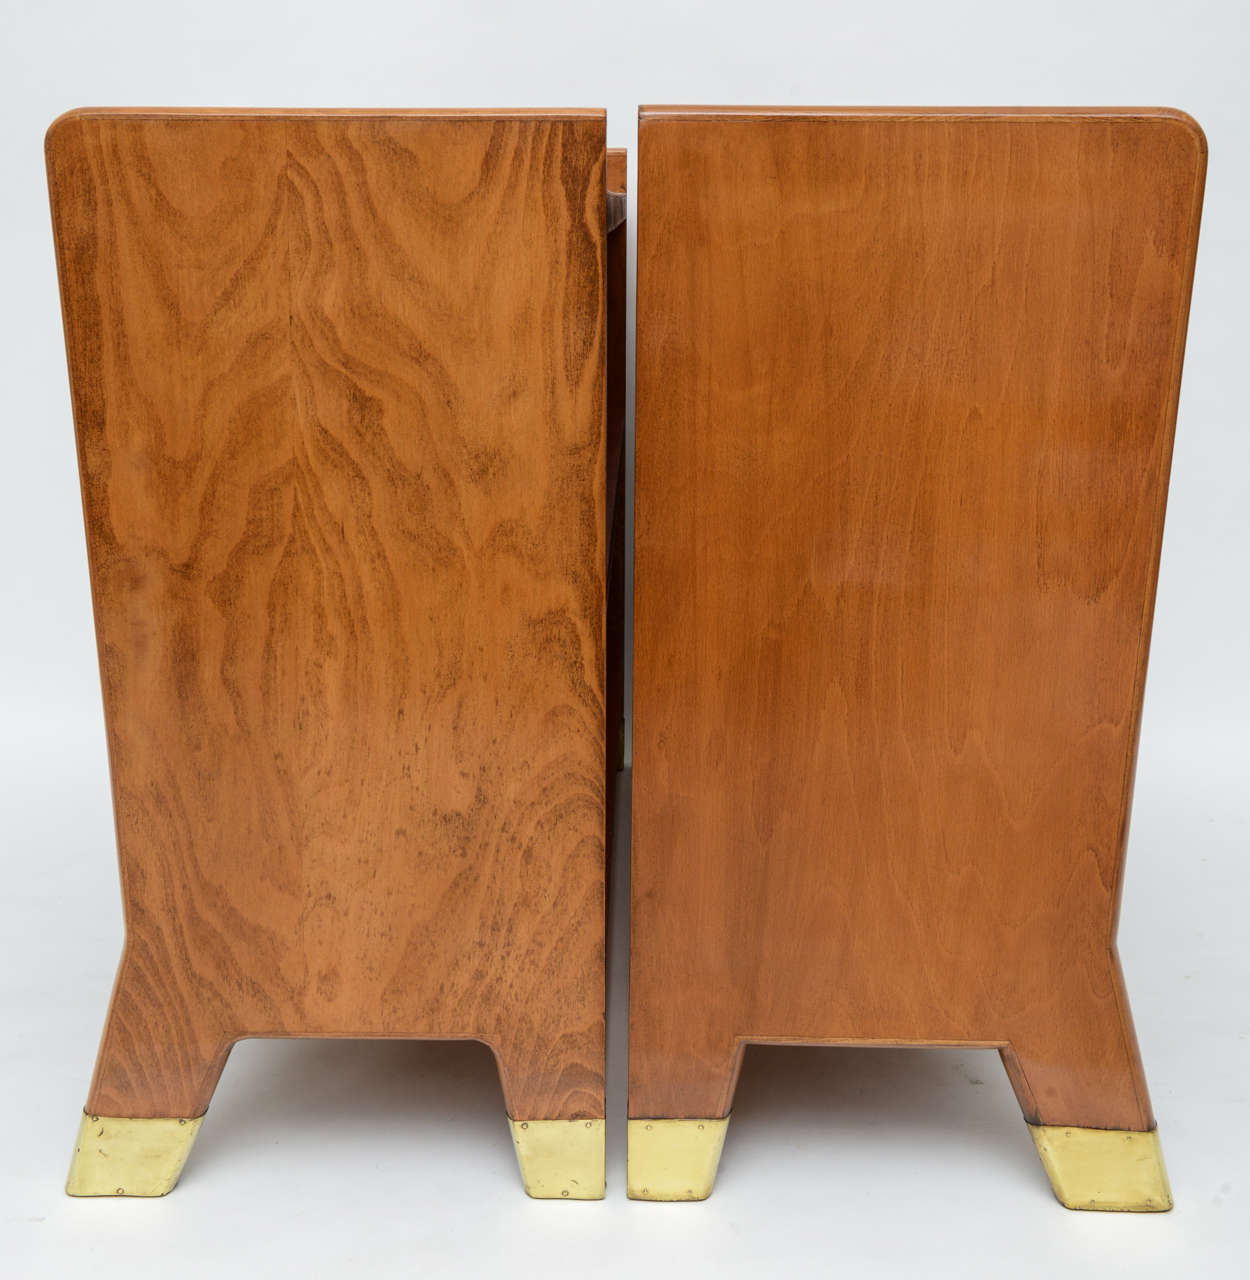 Fine Gio Ponti Fruitwood and Leather Dwarf Bookcase In Excellent Condition For Sale In Hollywood, FL